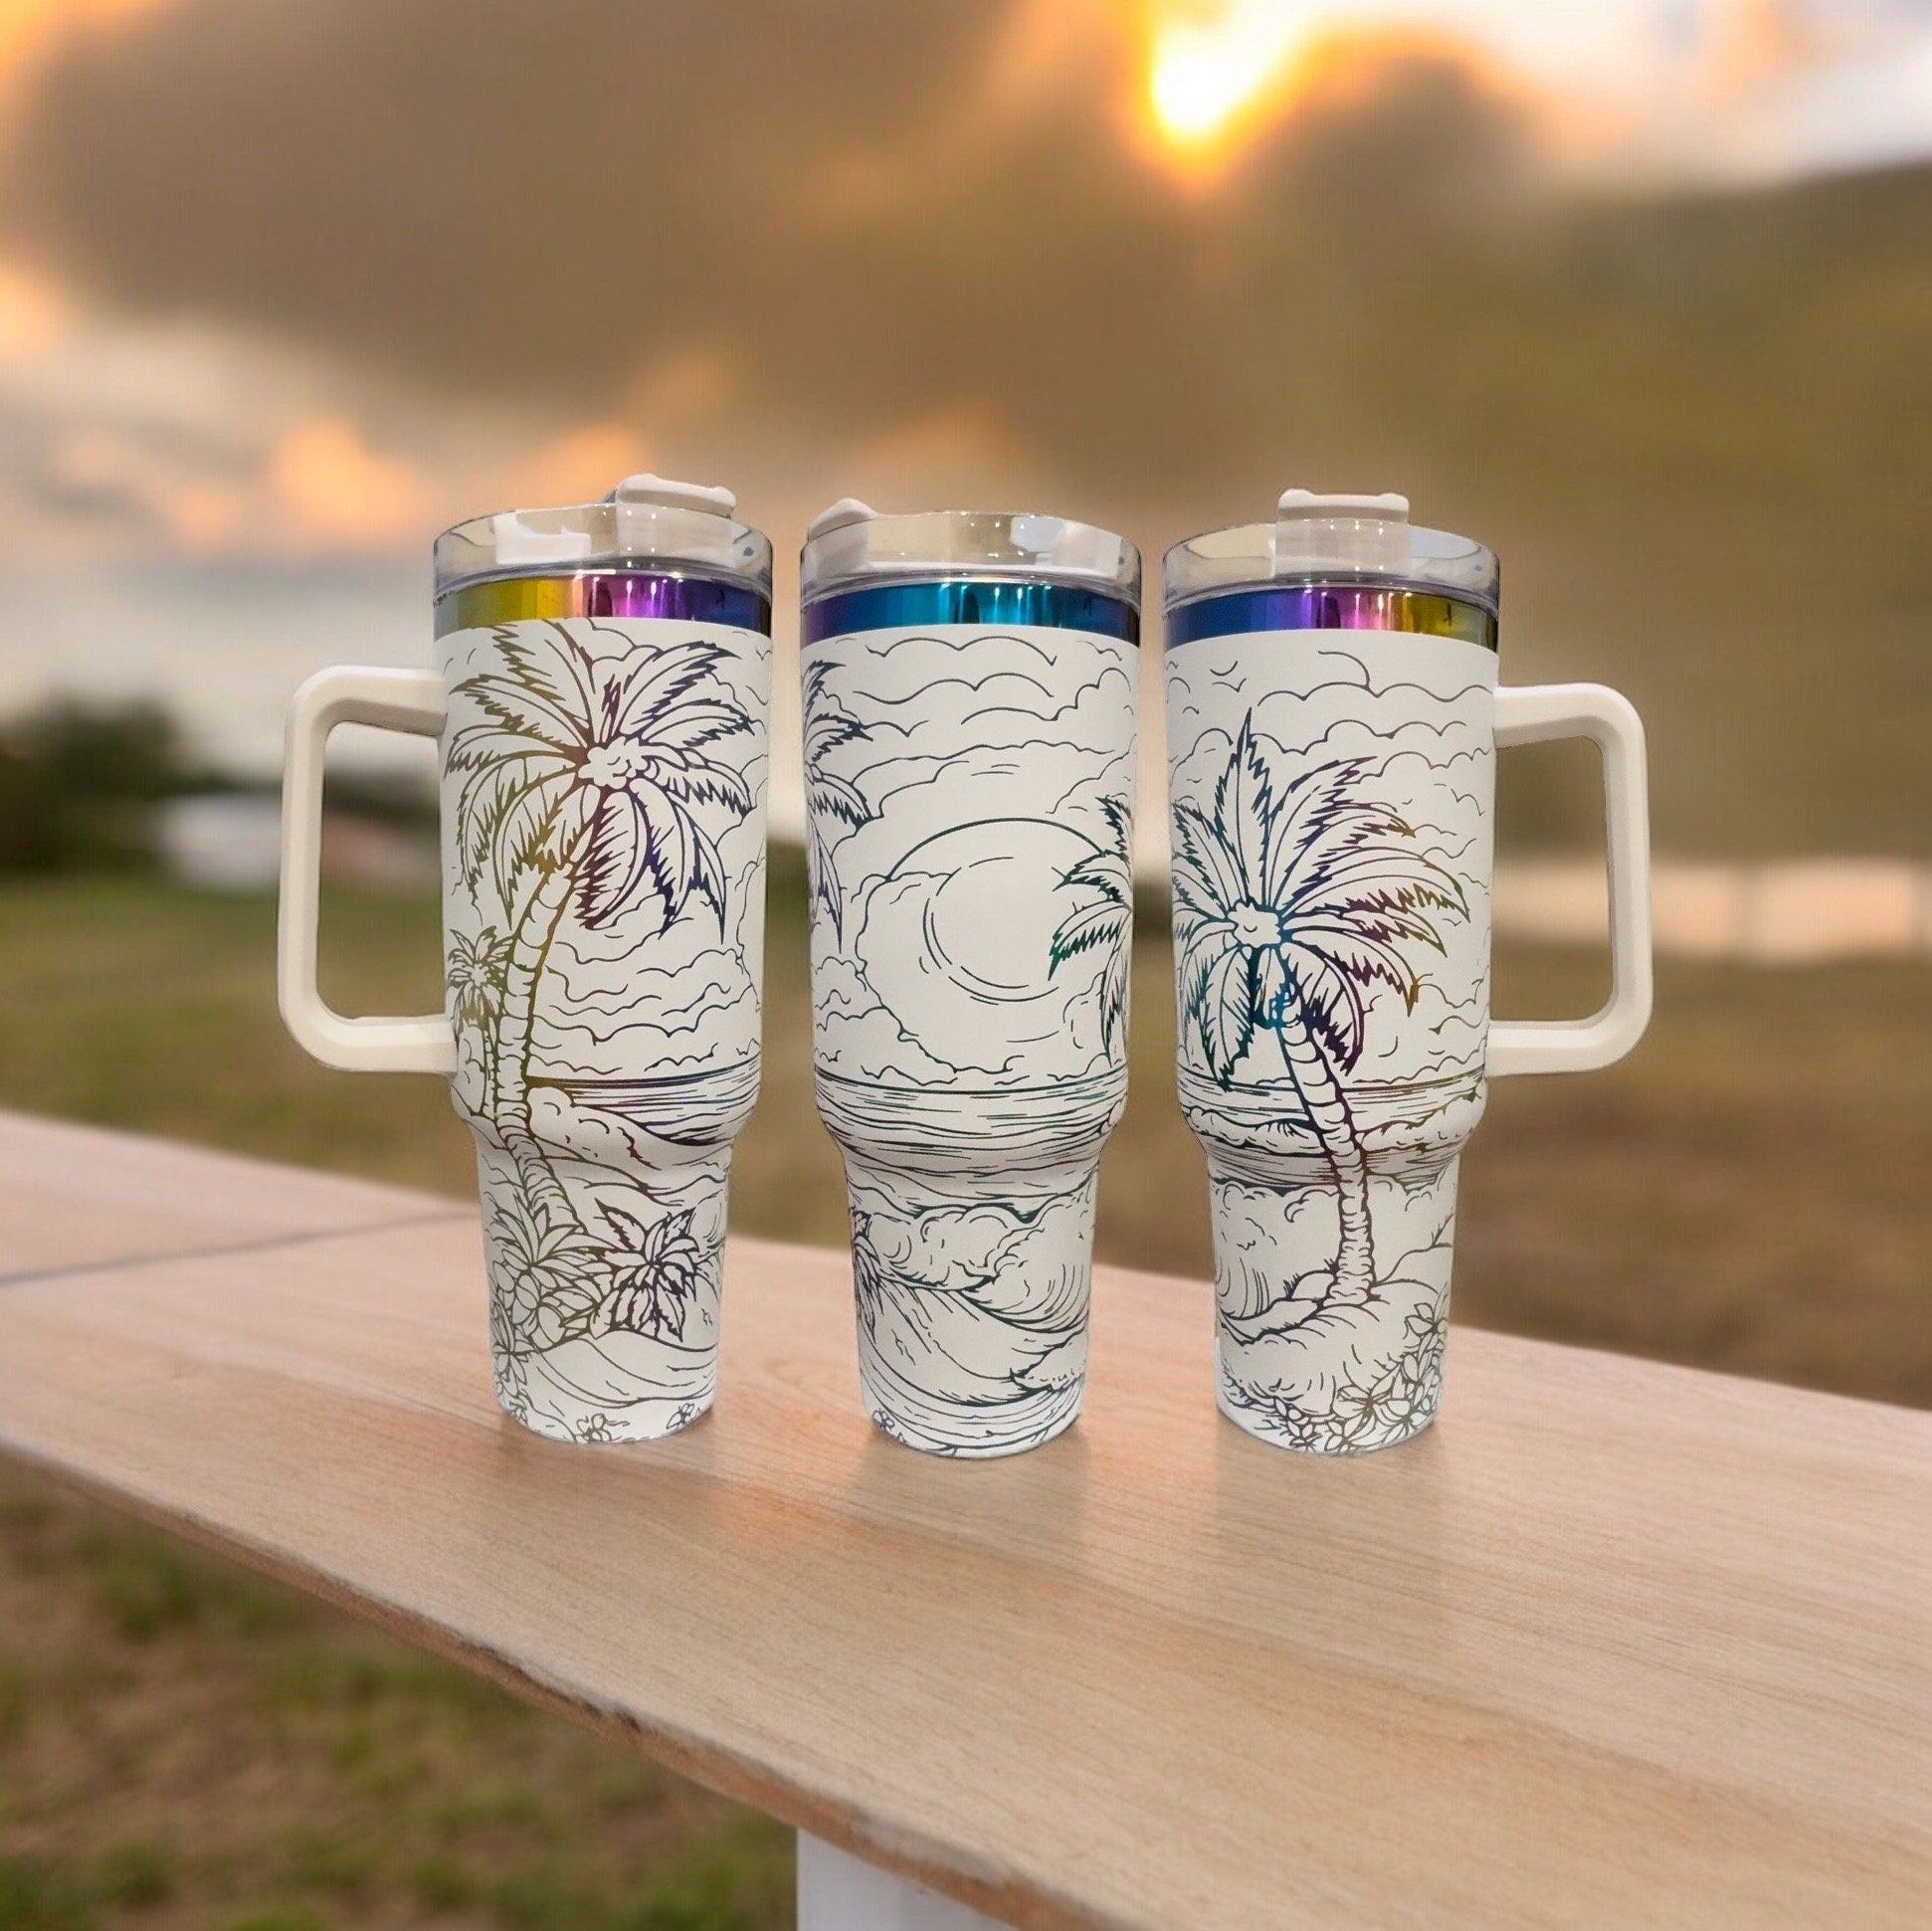 Rainbow 40oz Tumbler with Handle and Straw - Laser Engraved Full Wrap Design - Unique Drinkware Gift